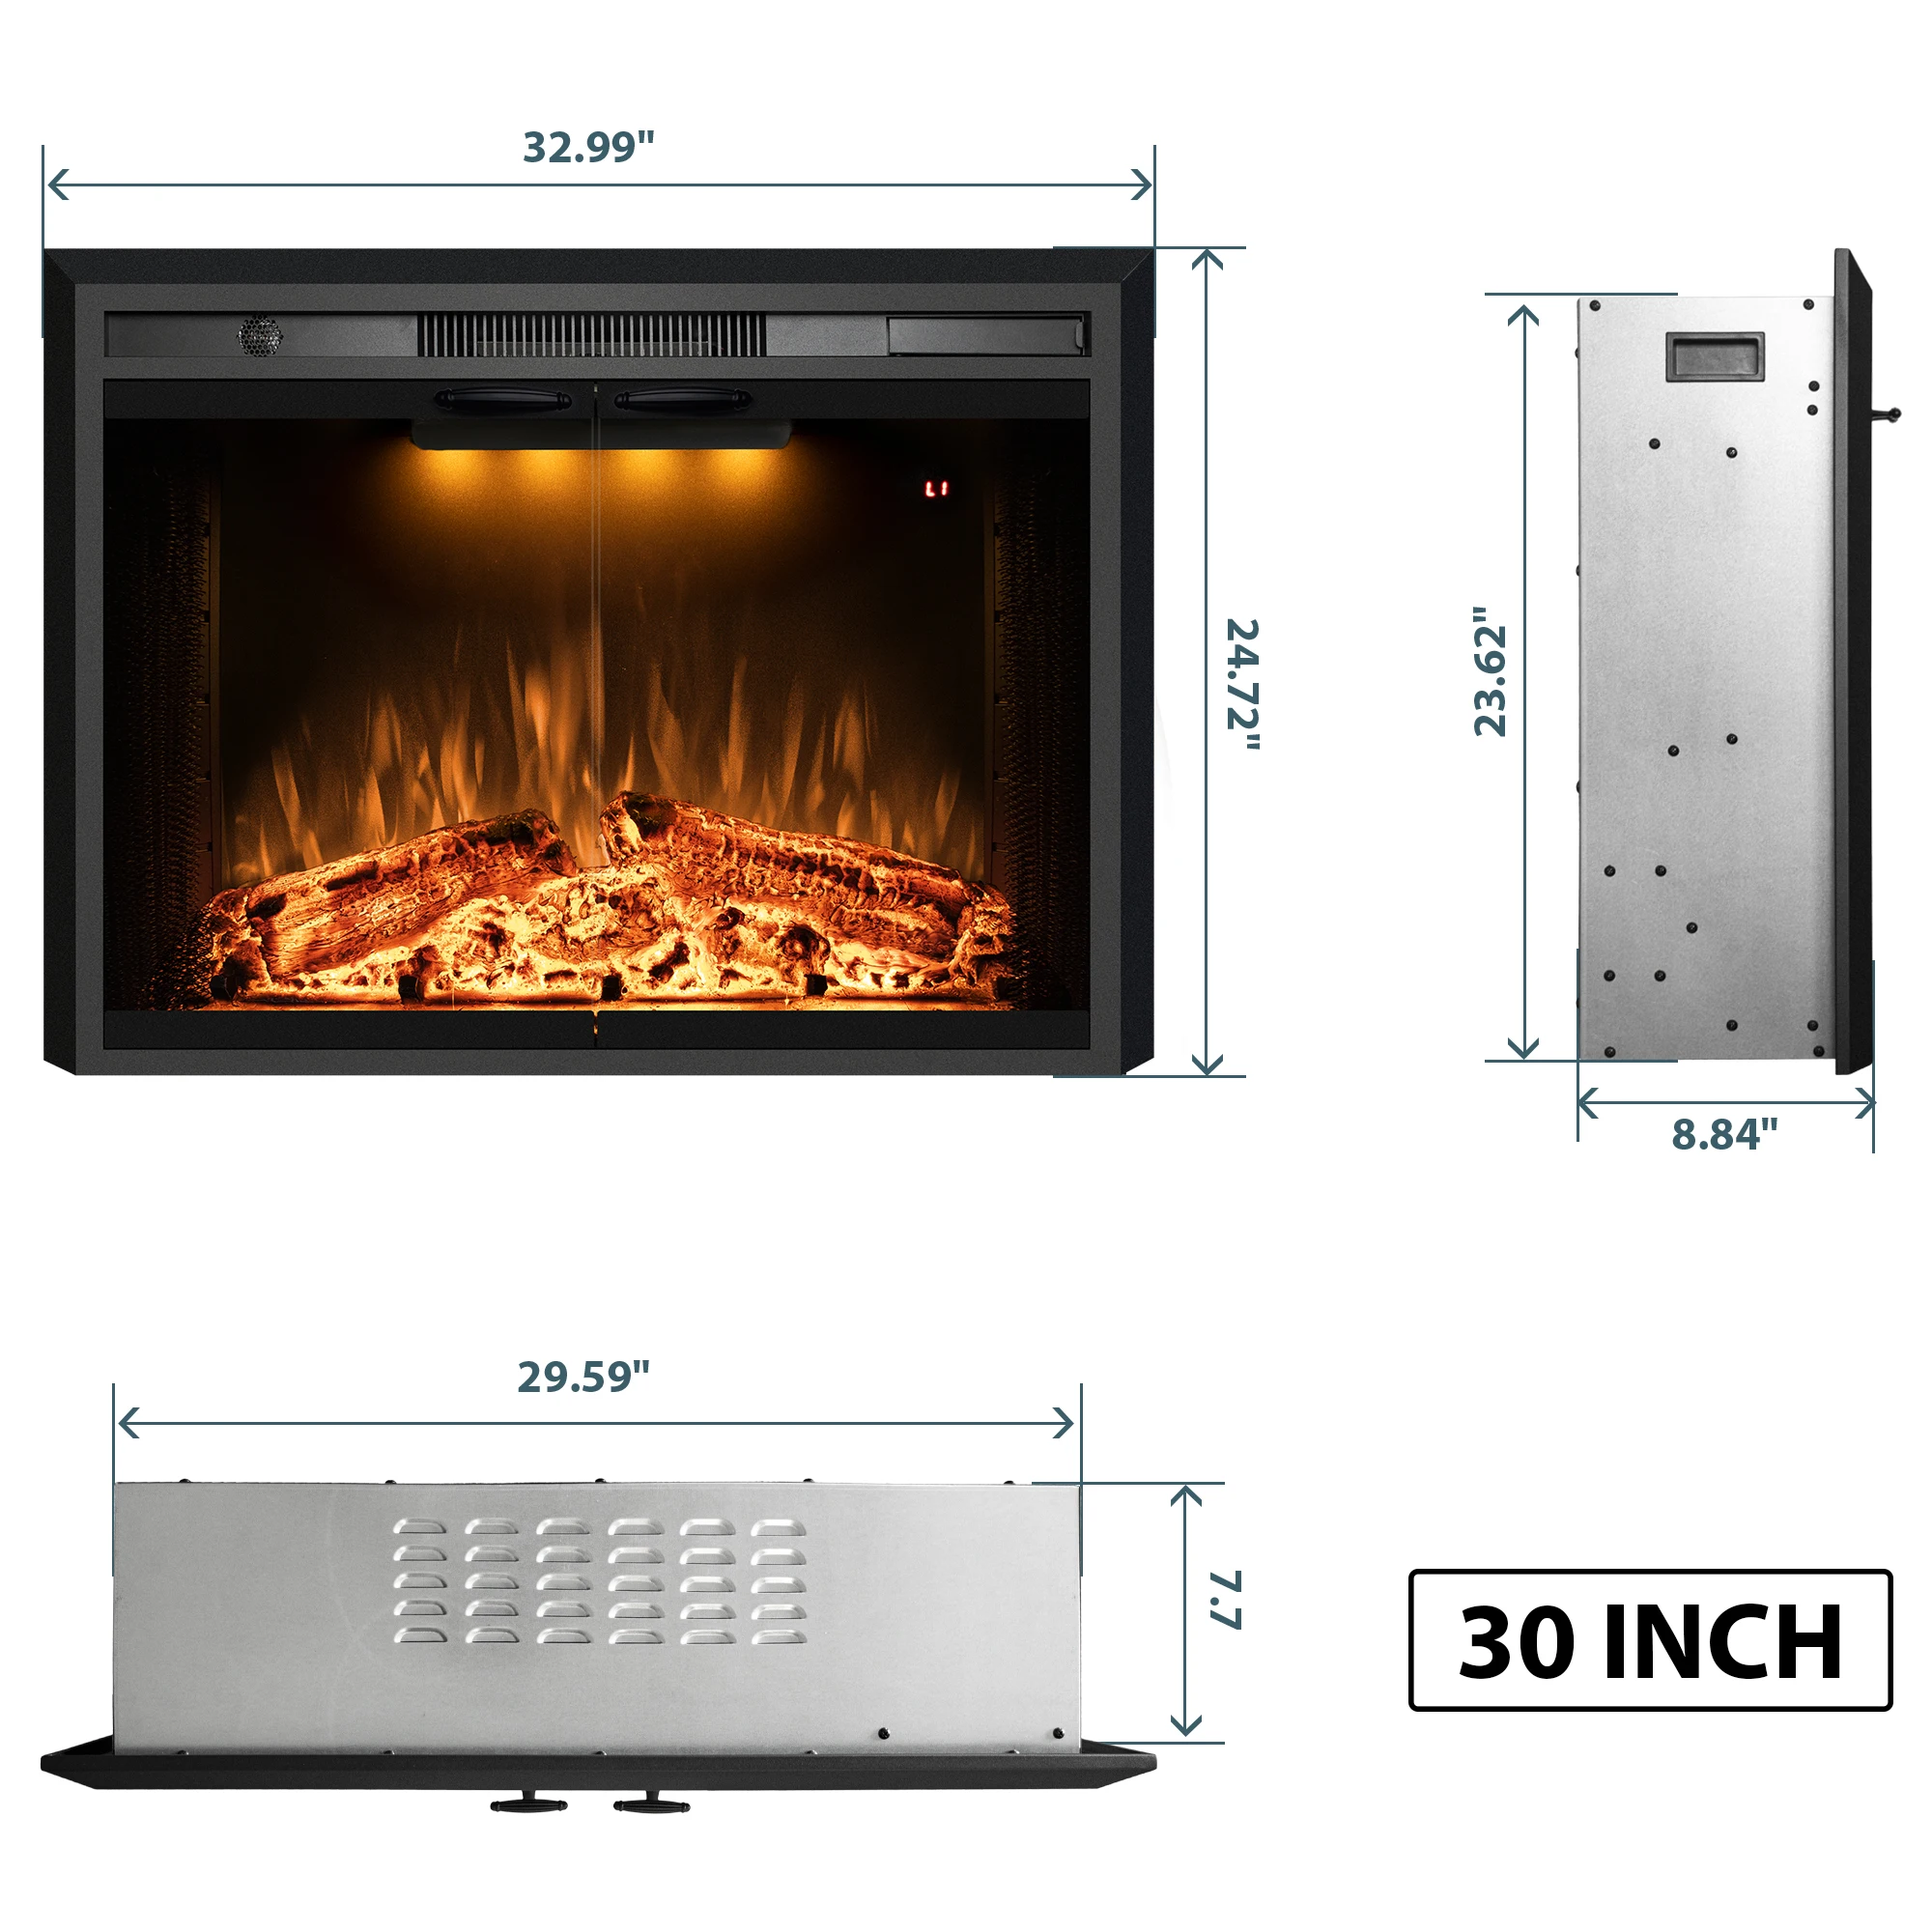 Luxstar 33 Inches Electric Fireplace Heater Inserts with Glass Door Mesh Screen Fire Crackling Sounds Decorative